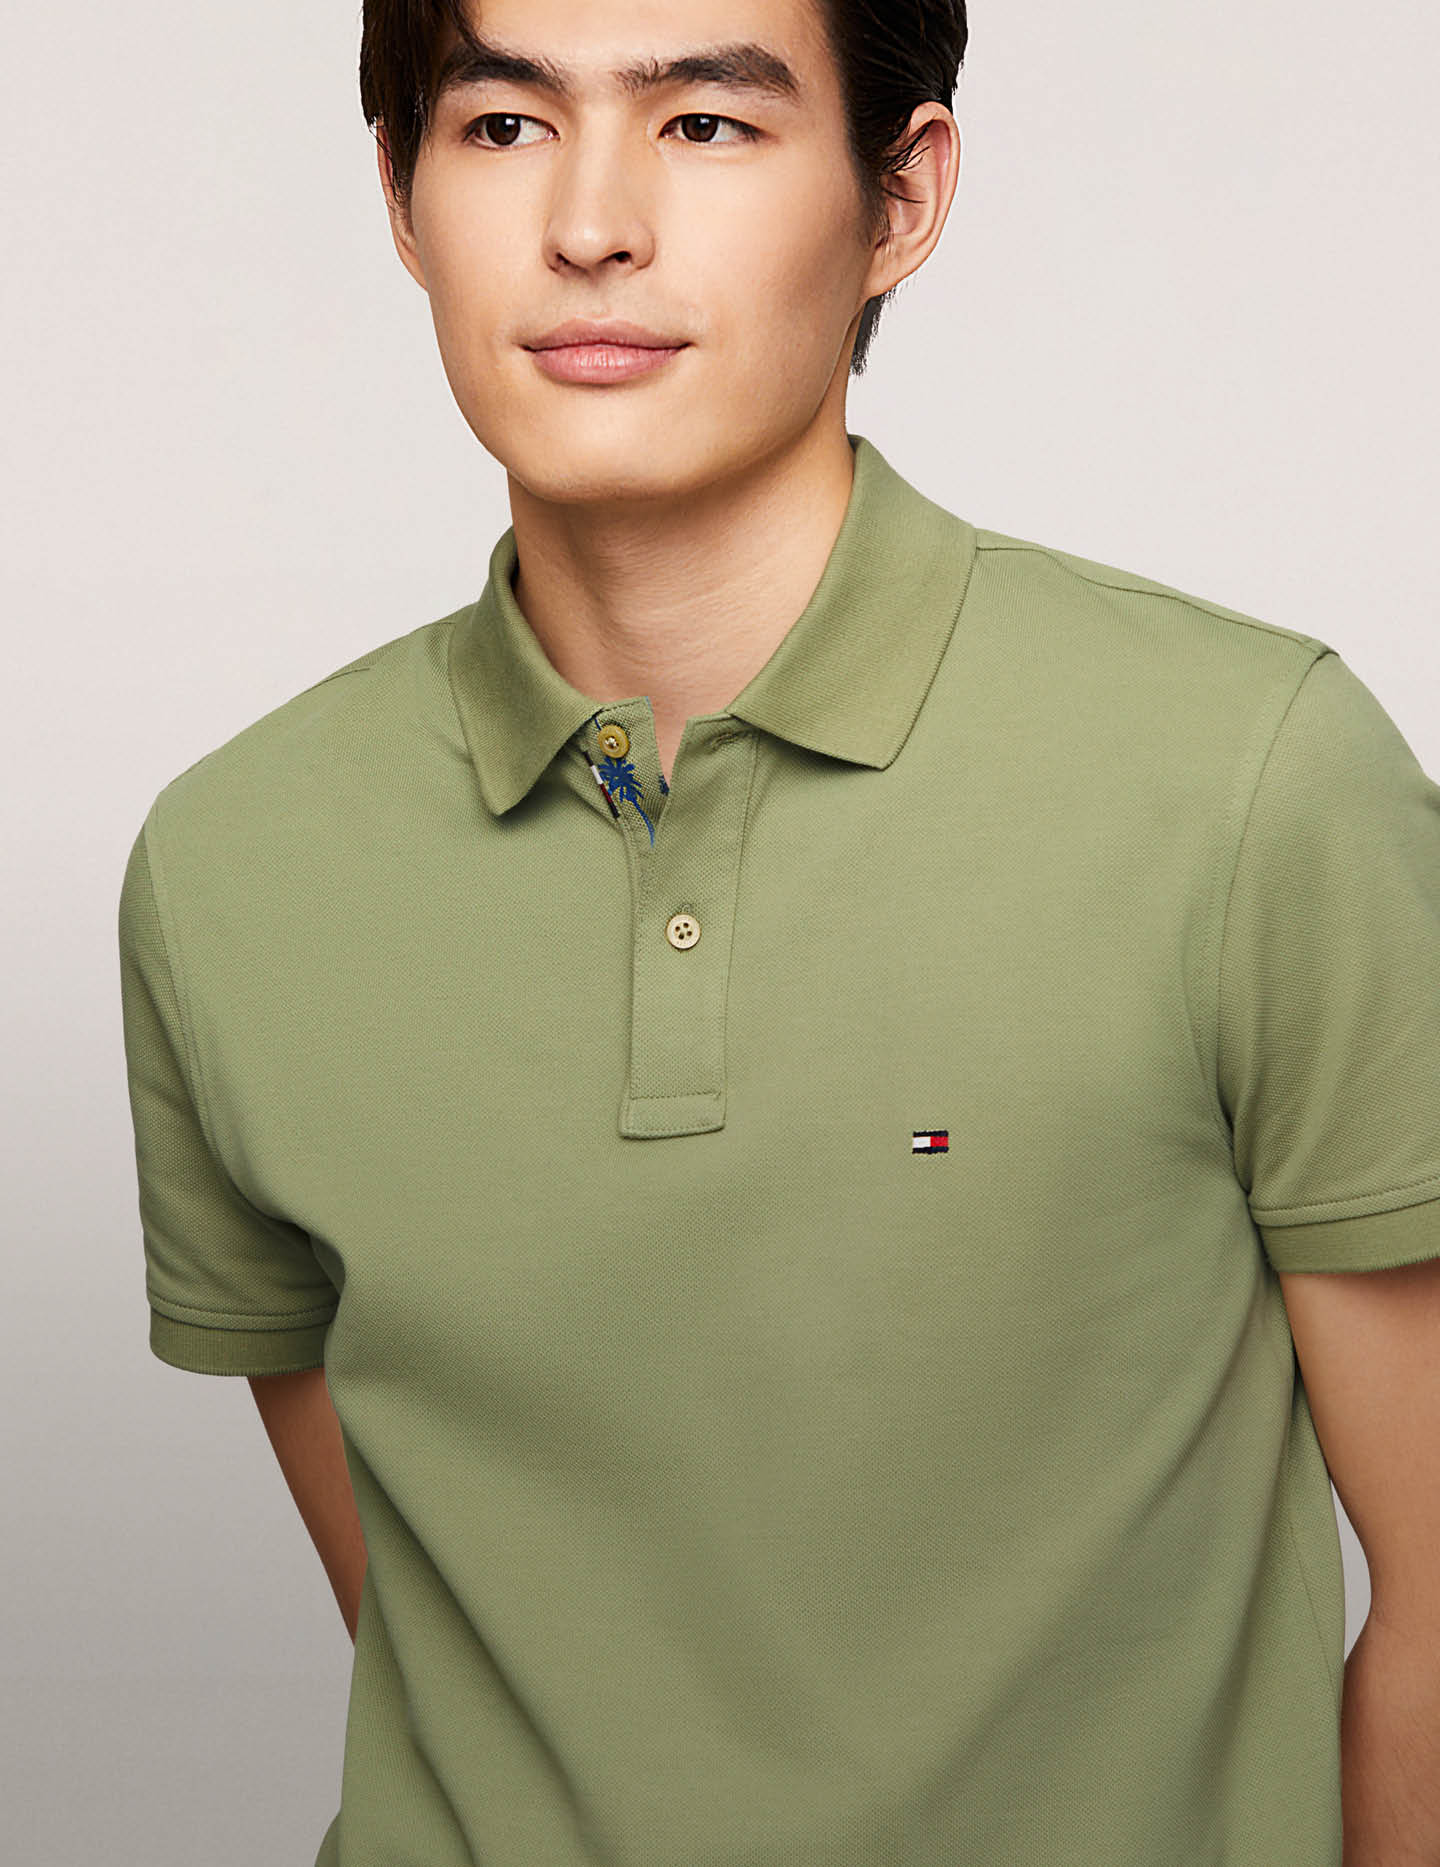 Tommy Hilfiger Men's Sale Polos Up to 50% Off